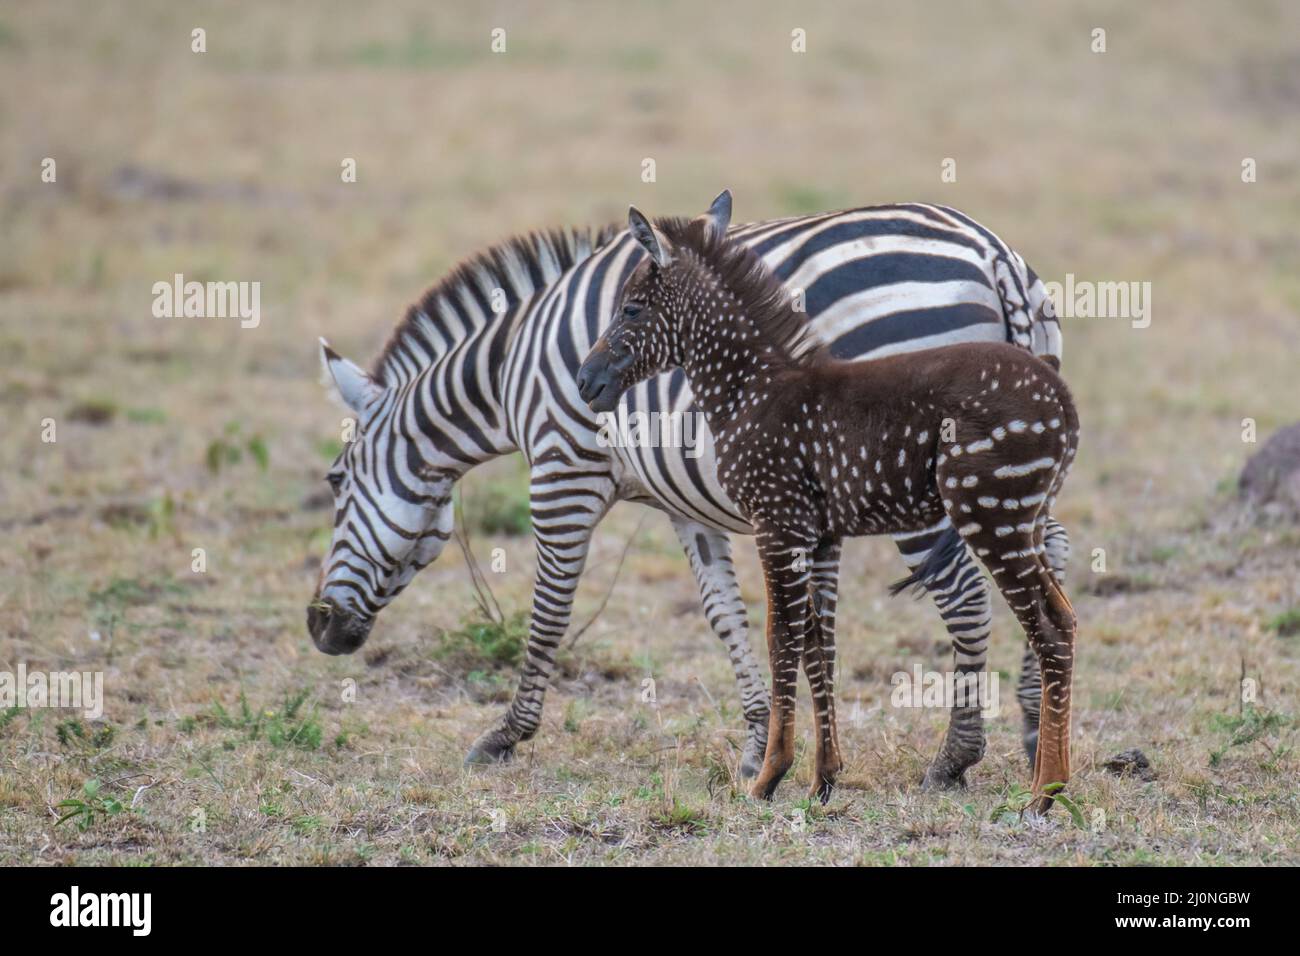 Exchanging stripes for spots, this unique zebra foal was born with a rare condition called pseudomelanism that is affecting his coat appearance. Stock Photo